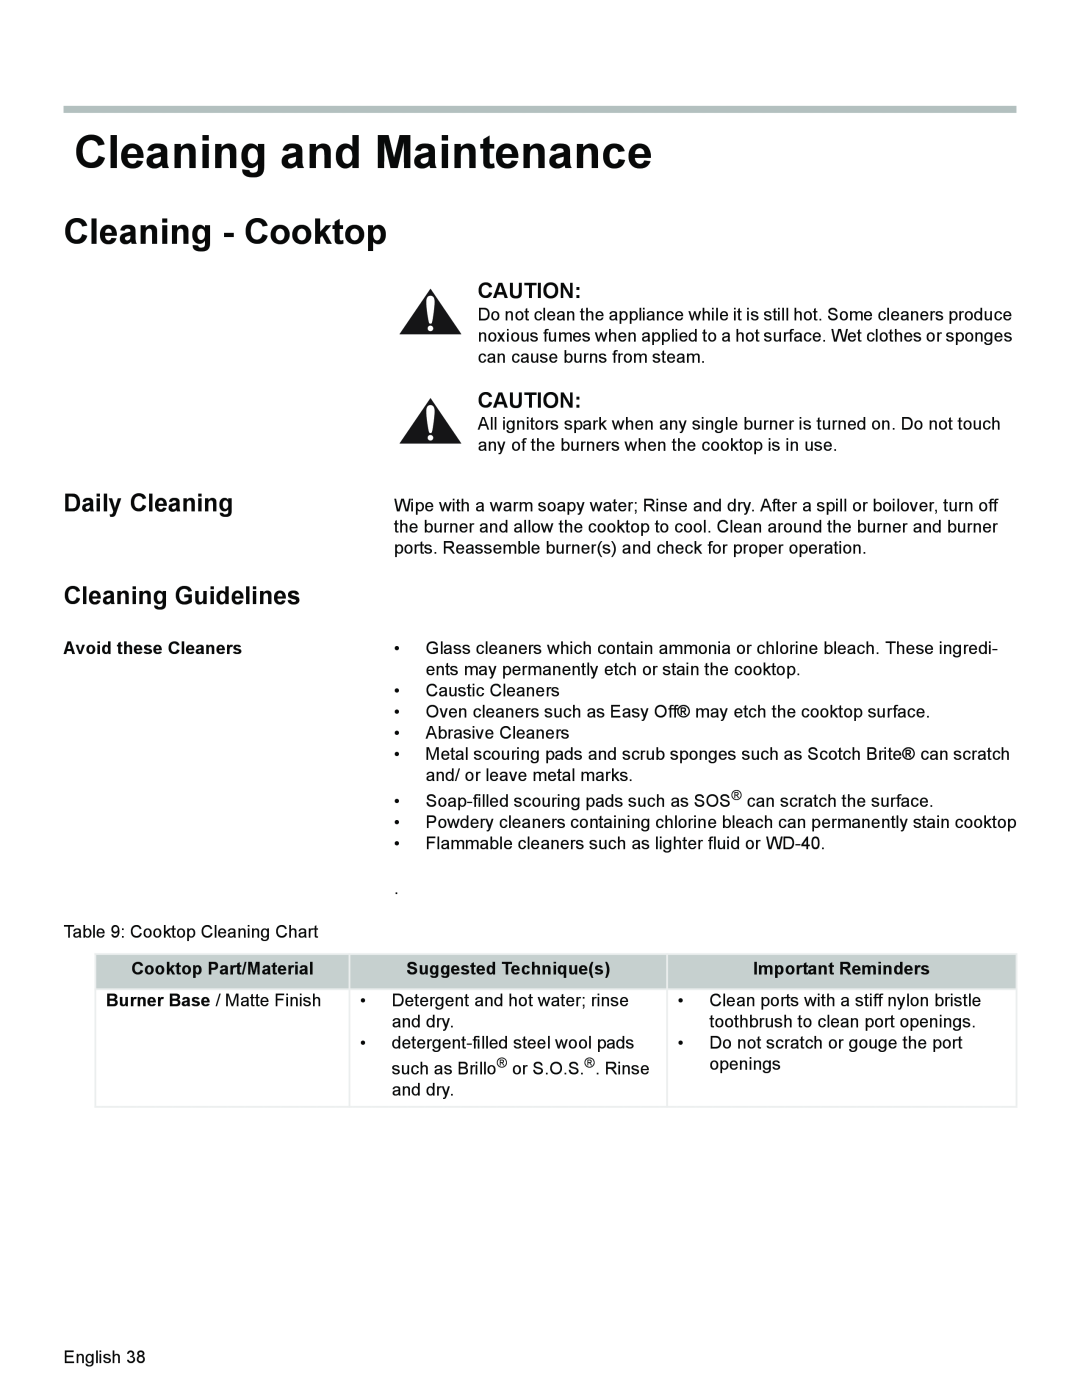 Siemens HD2528U Cleaning and Maintenance, Cleaning - Cooktop, Daily Cleaning, Cleaning Guidelines, Avoid these Cleaners 